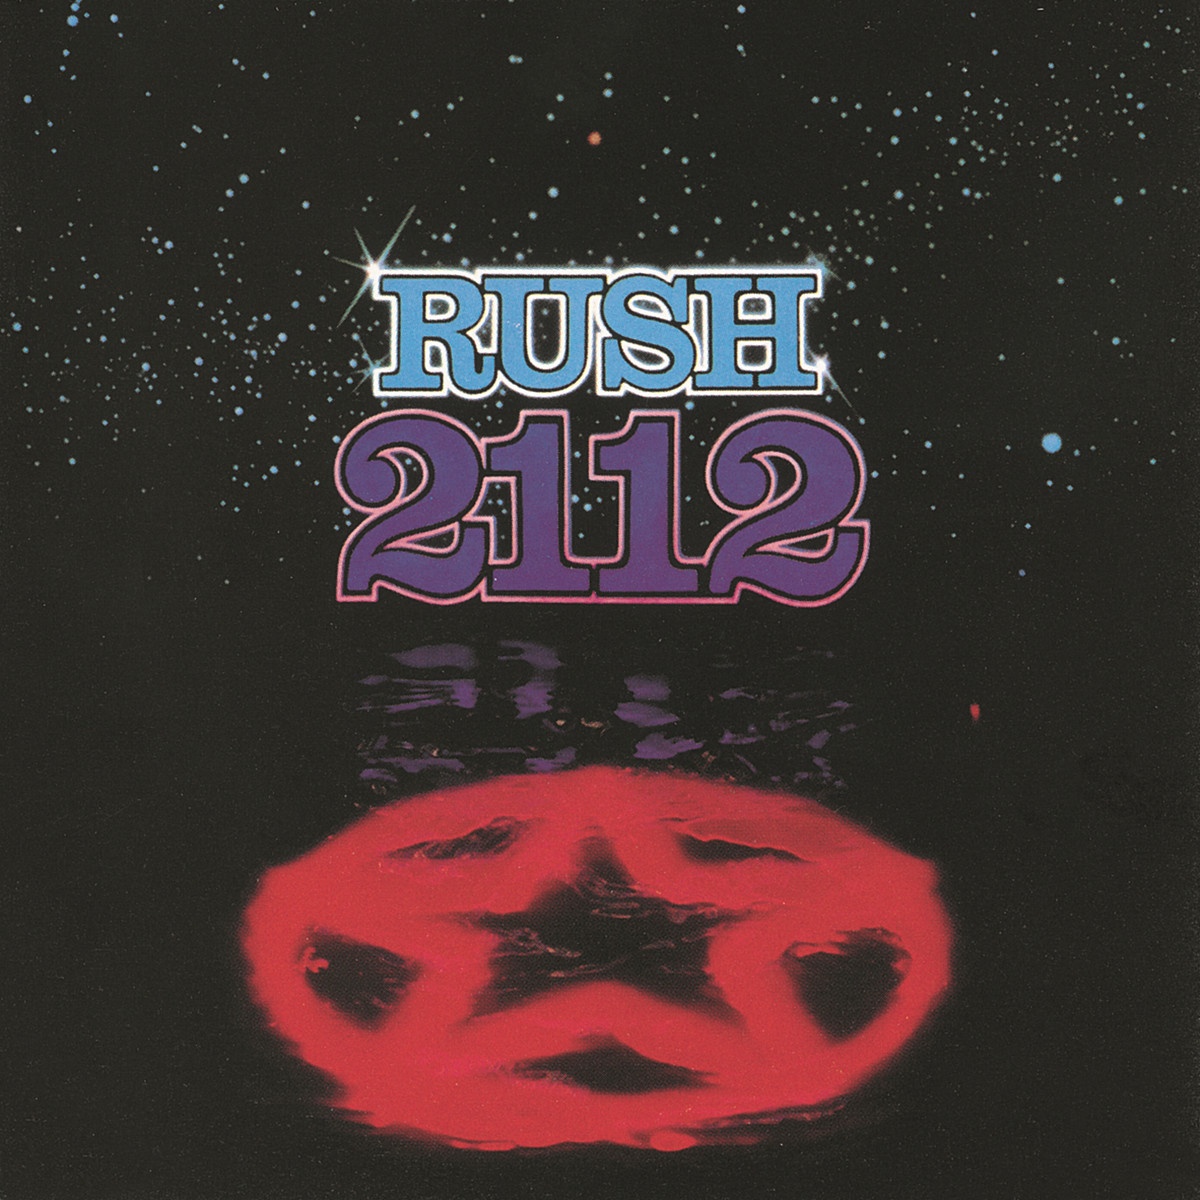 2112: Overture / The Temples Of Syrinx / Discovery